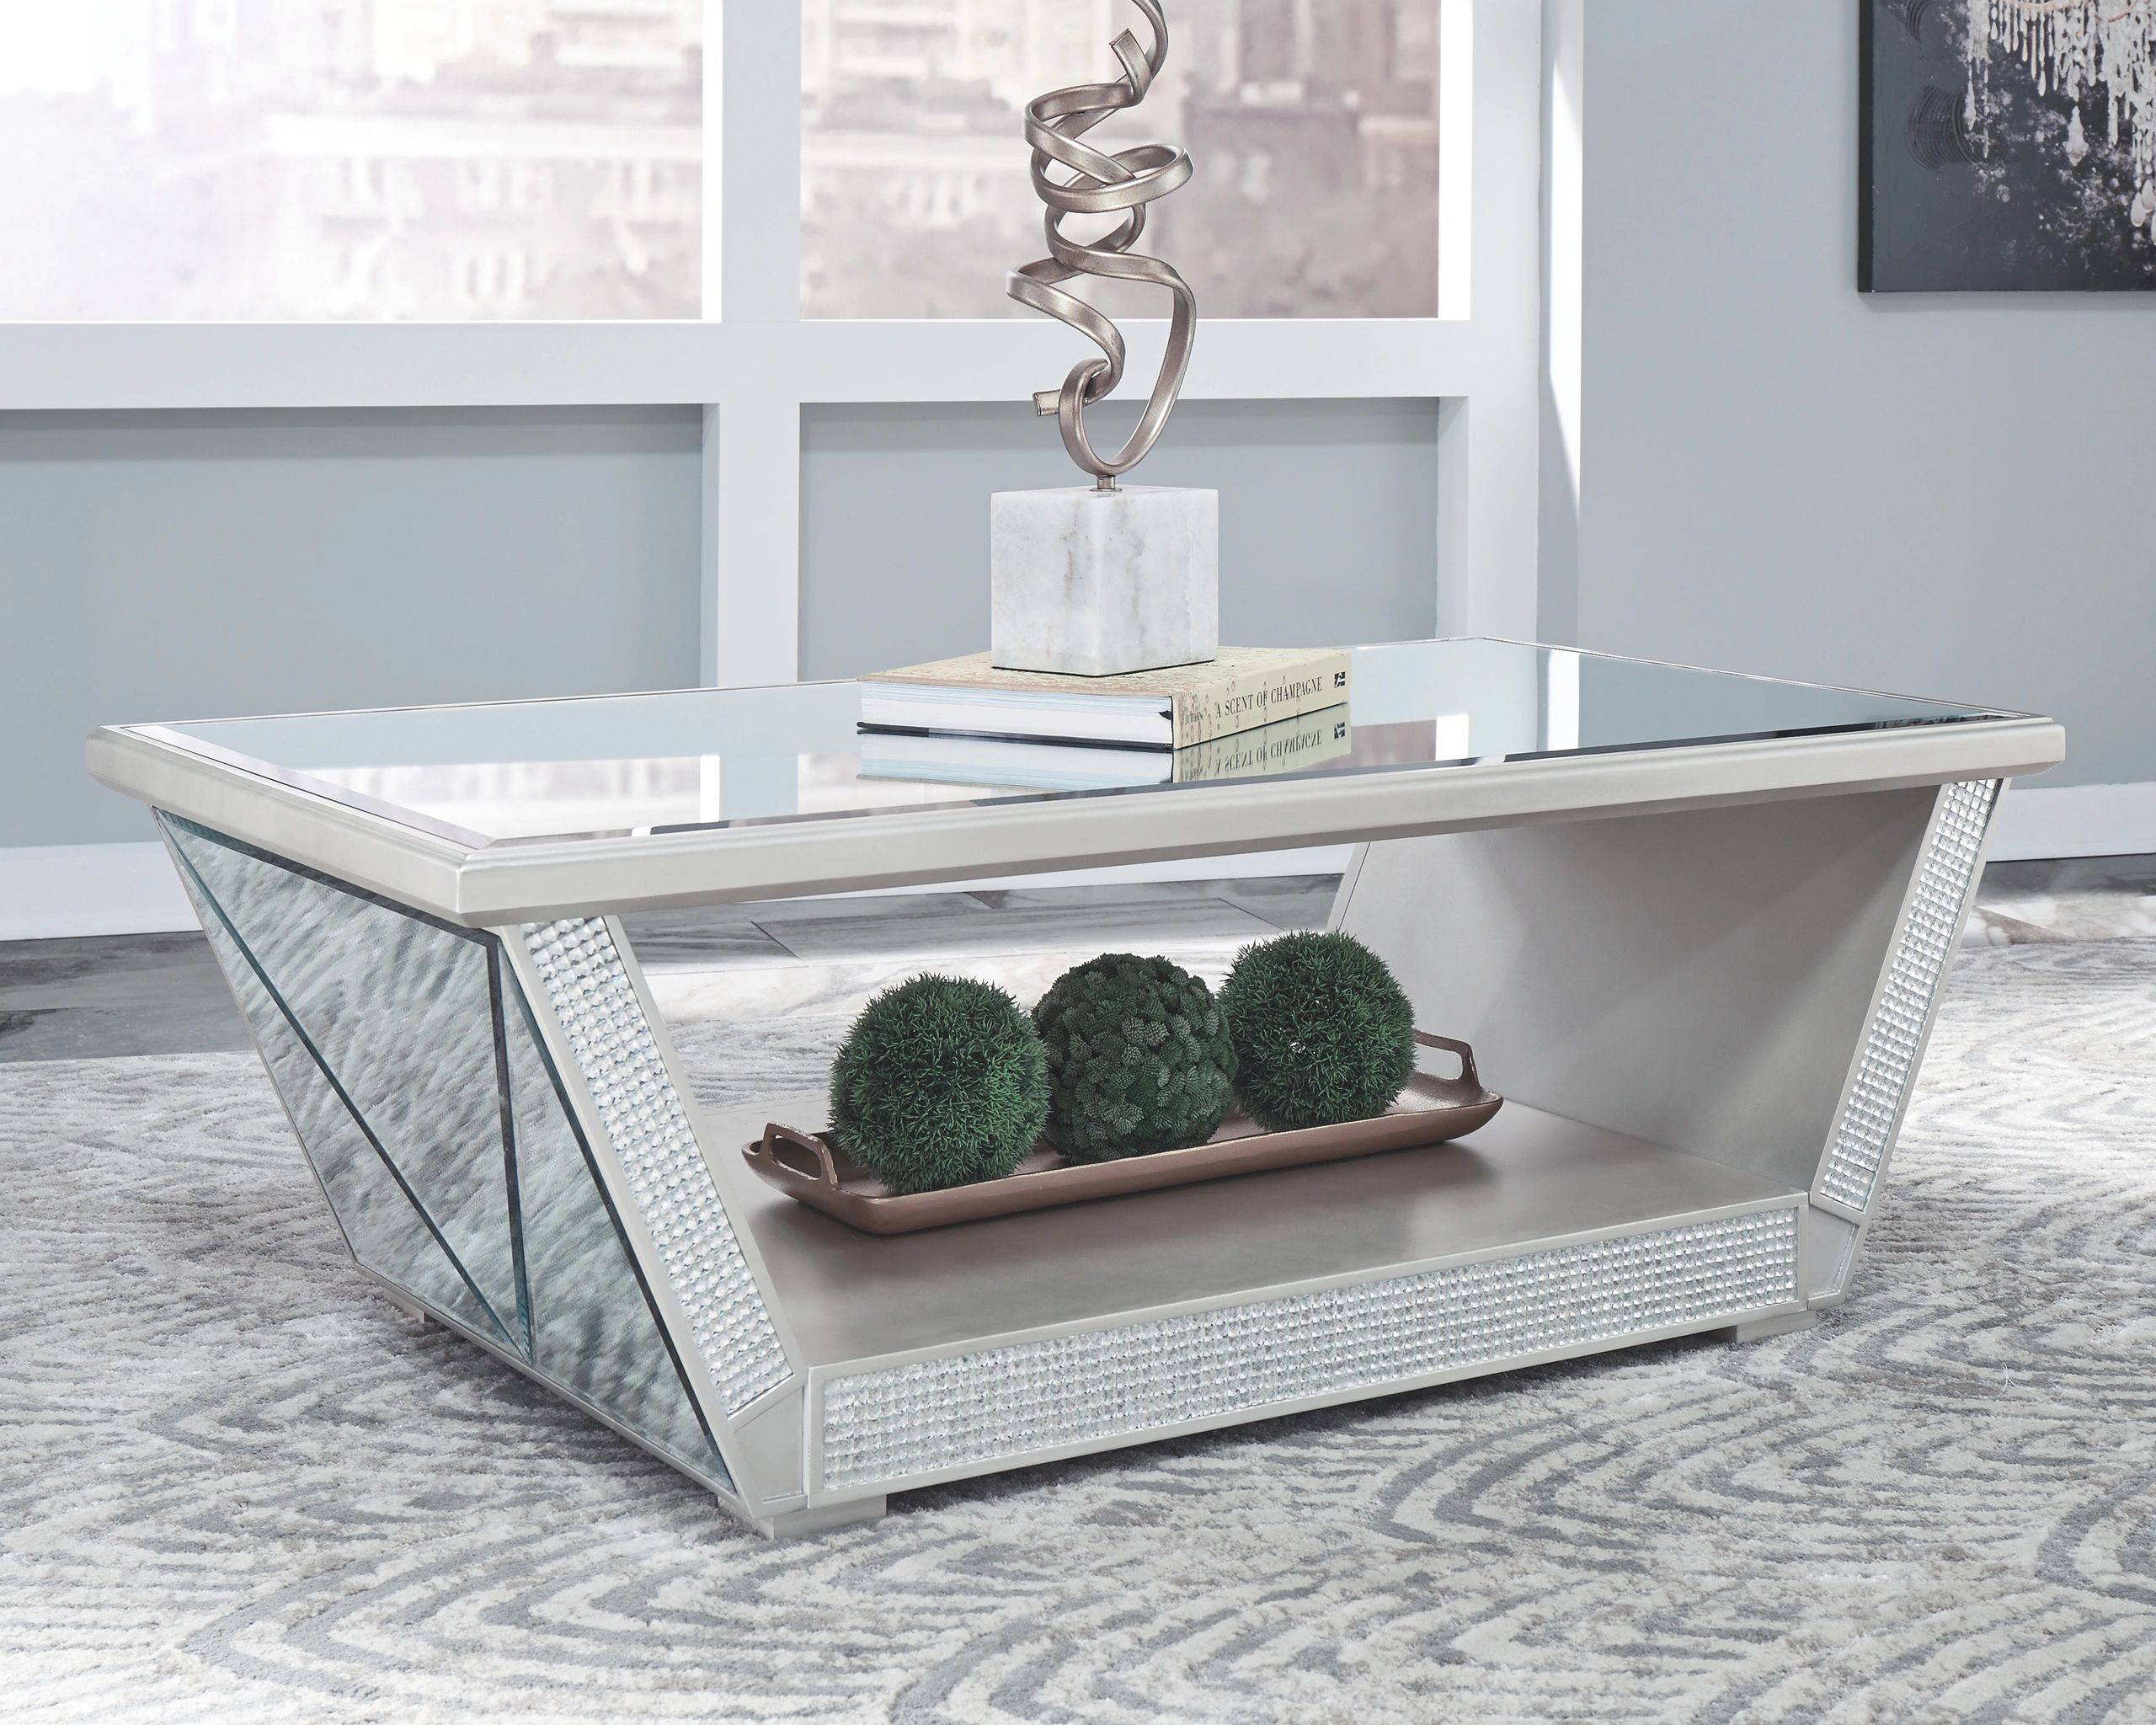 NAME: Fanmory Coffee Table
Cocktail table (1)
Style: Contemporary
Color: Silver Finish